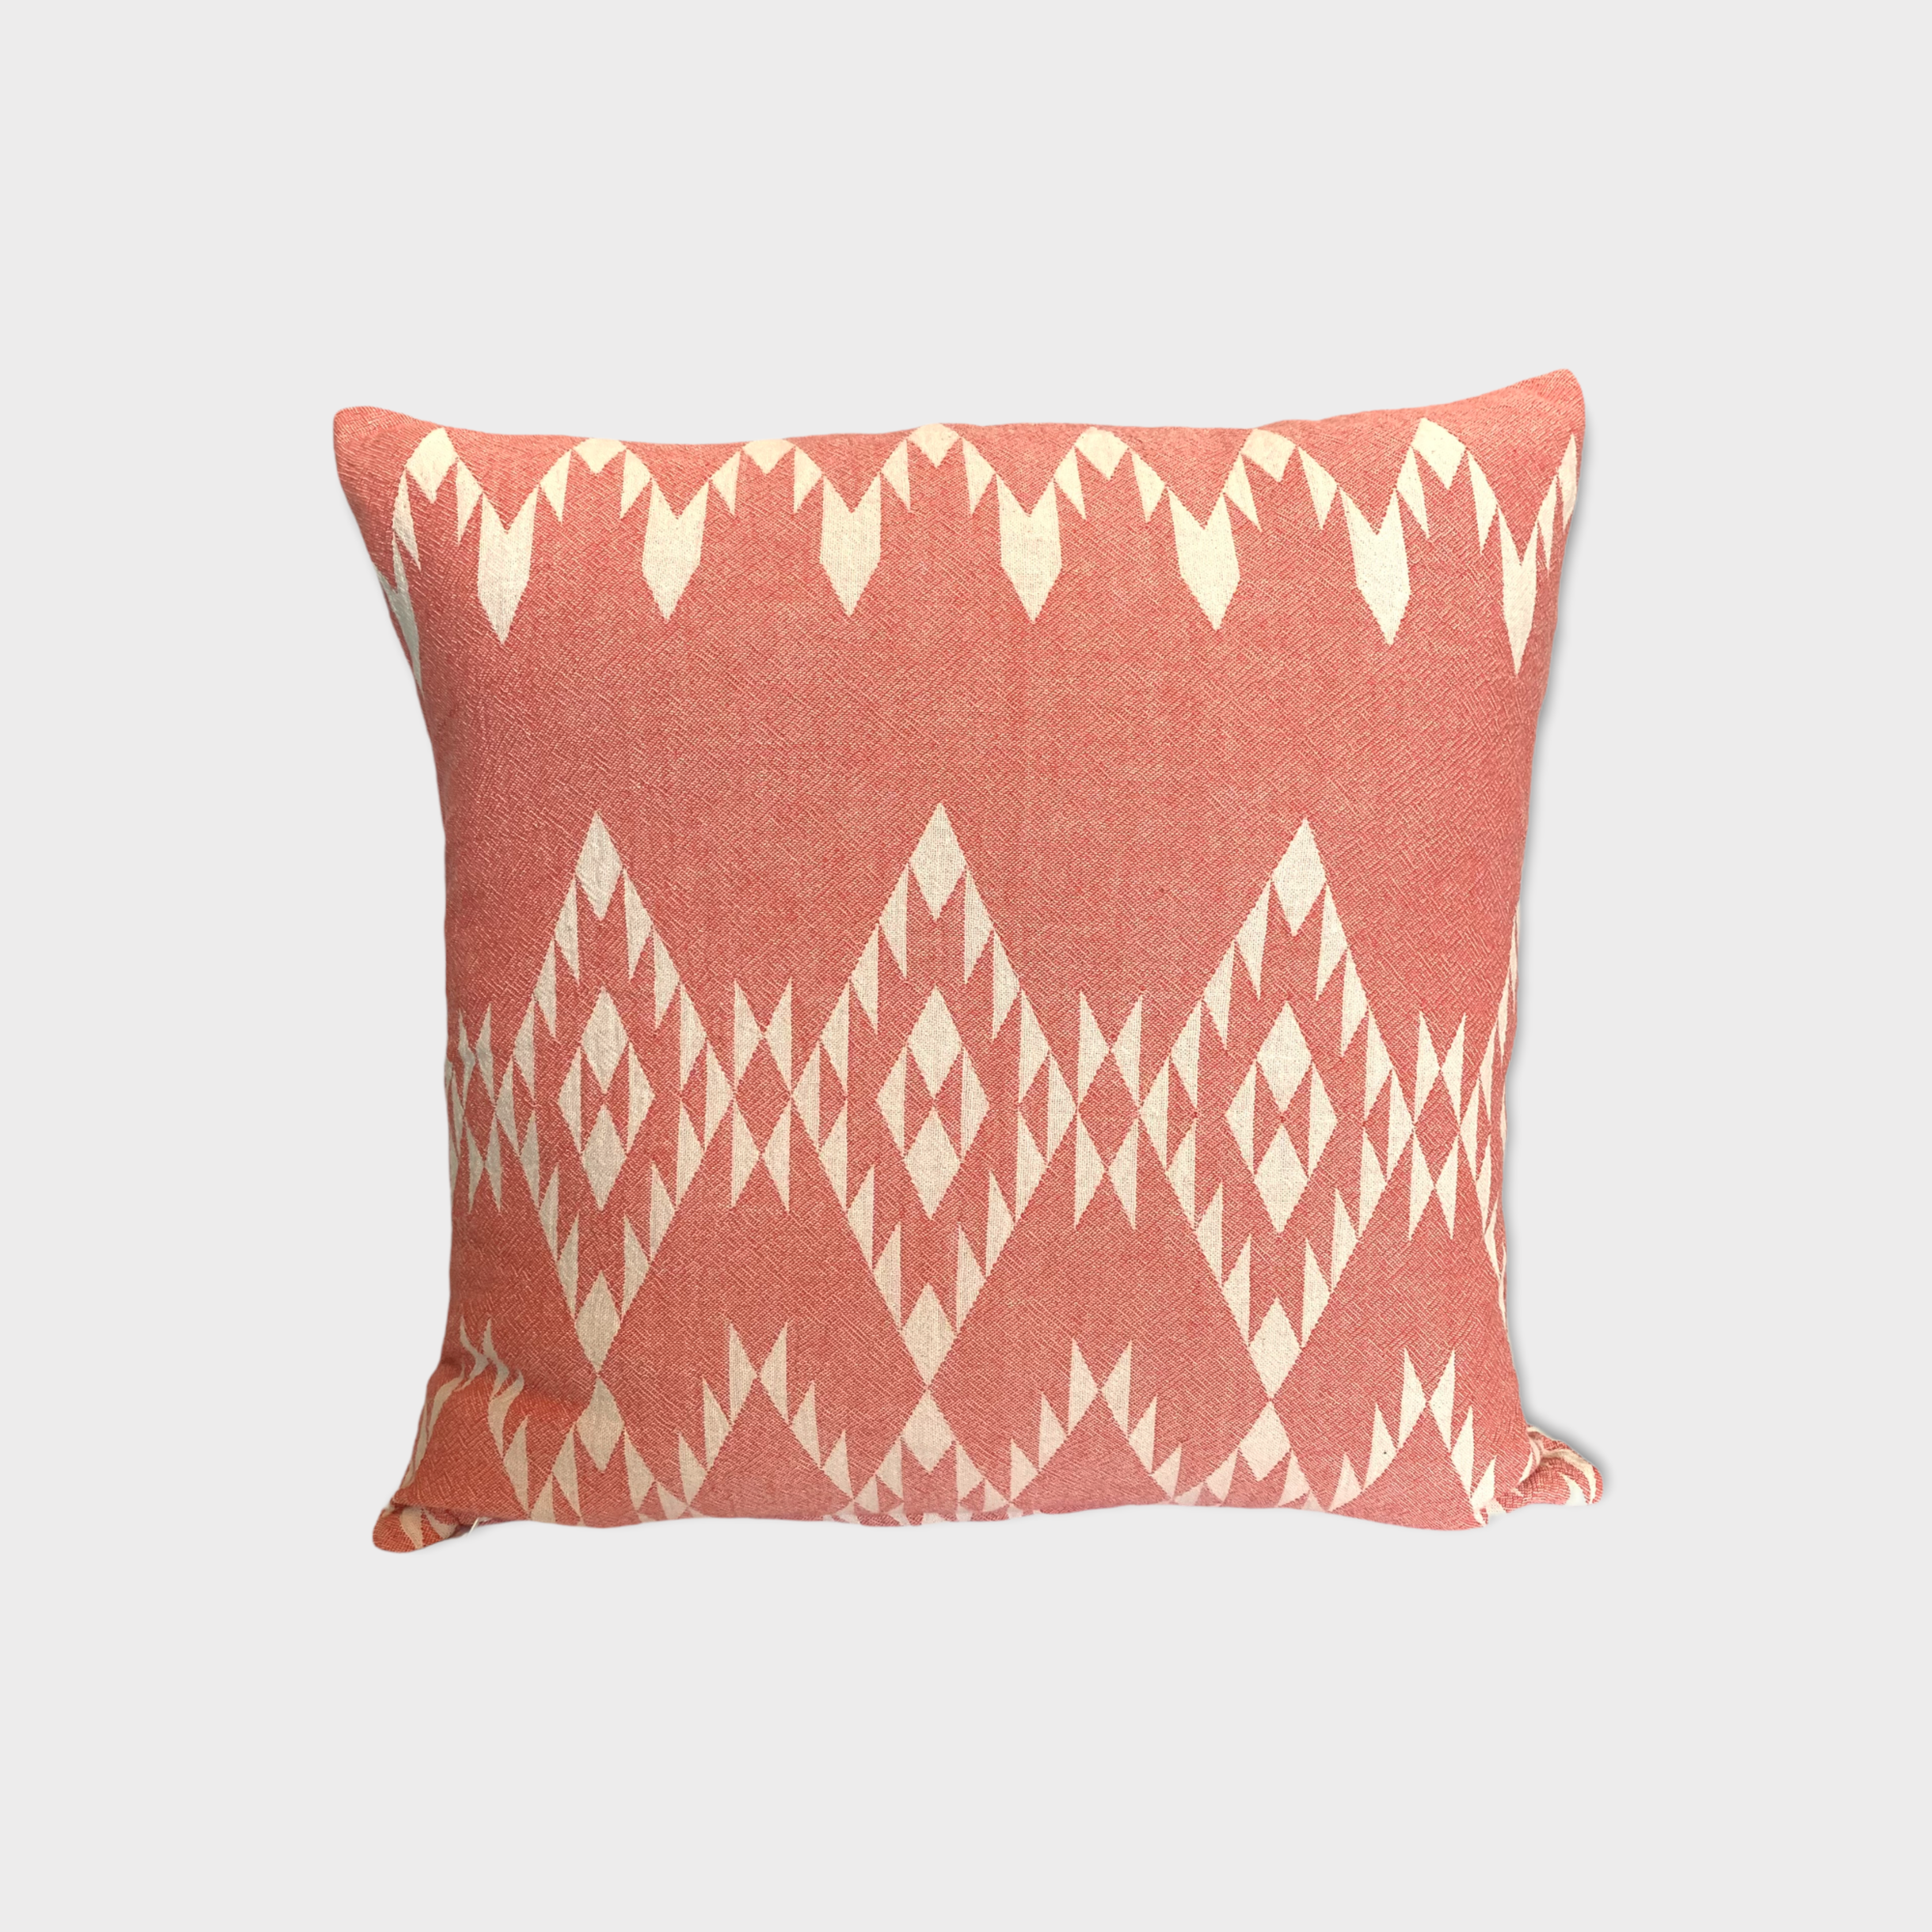 Handwoven pillow cover ETHNIC from Turkey